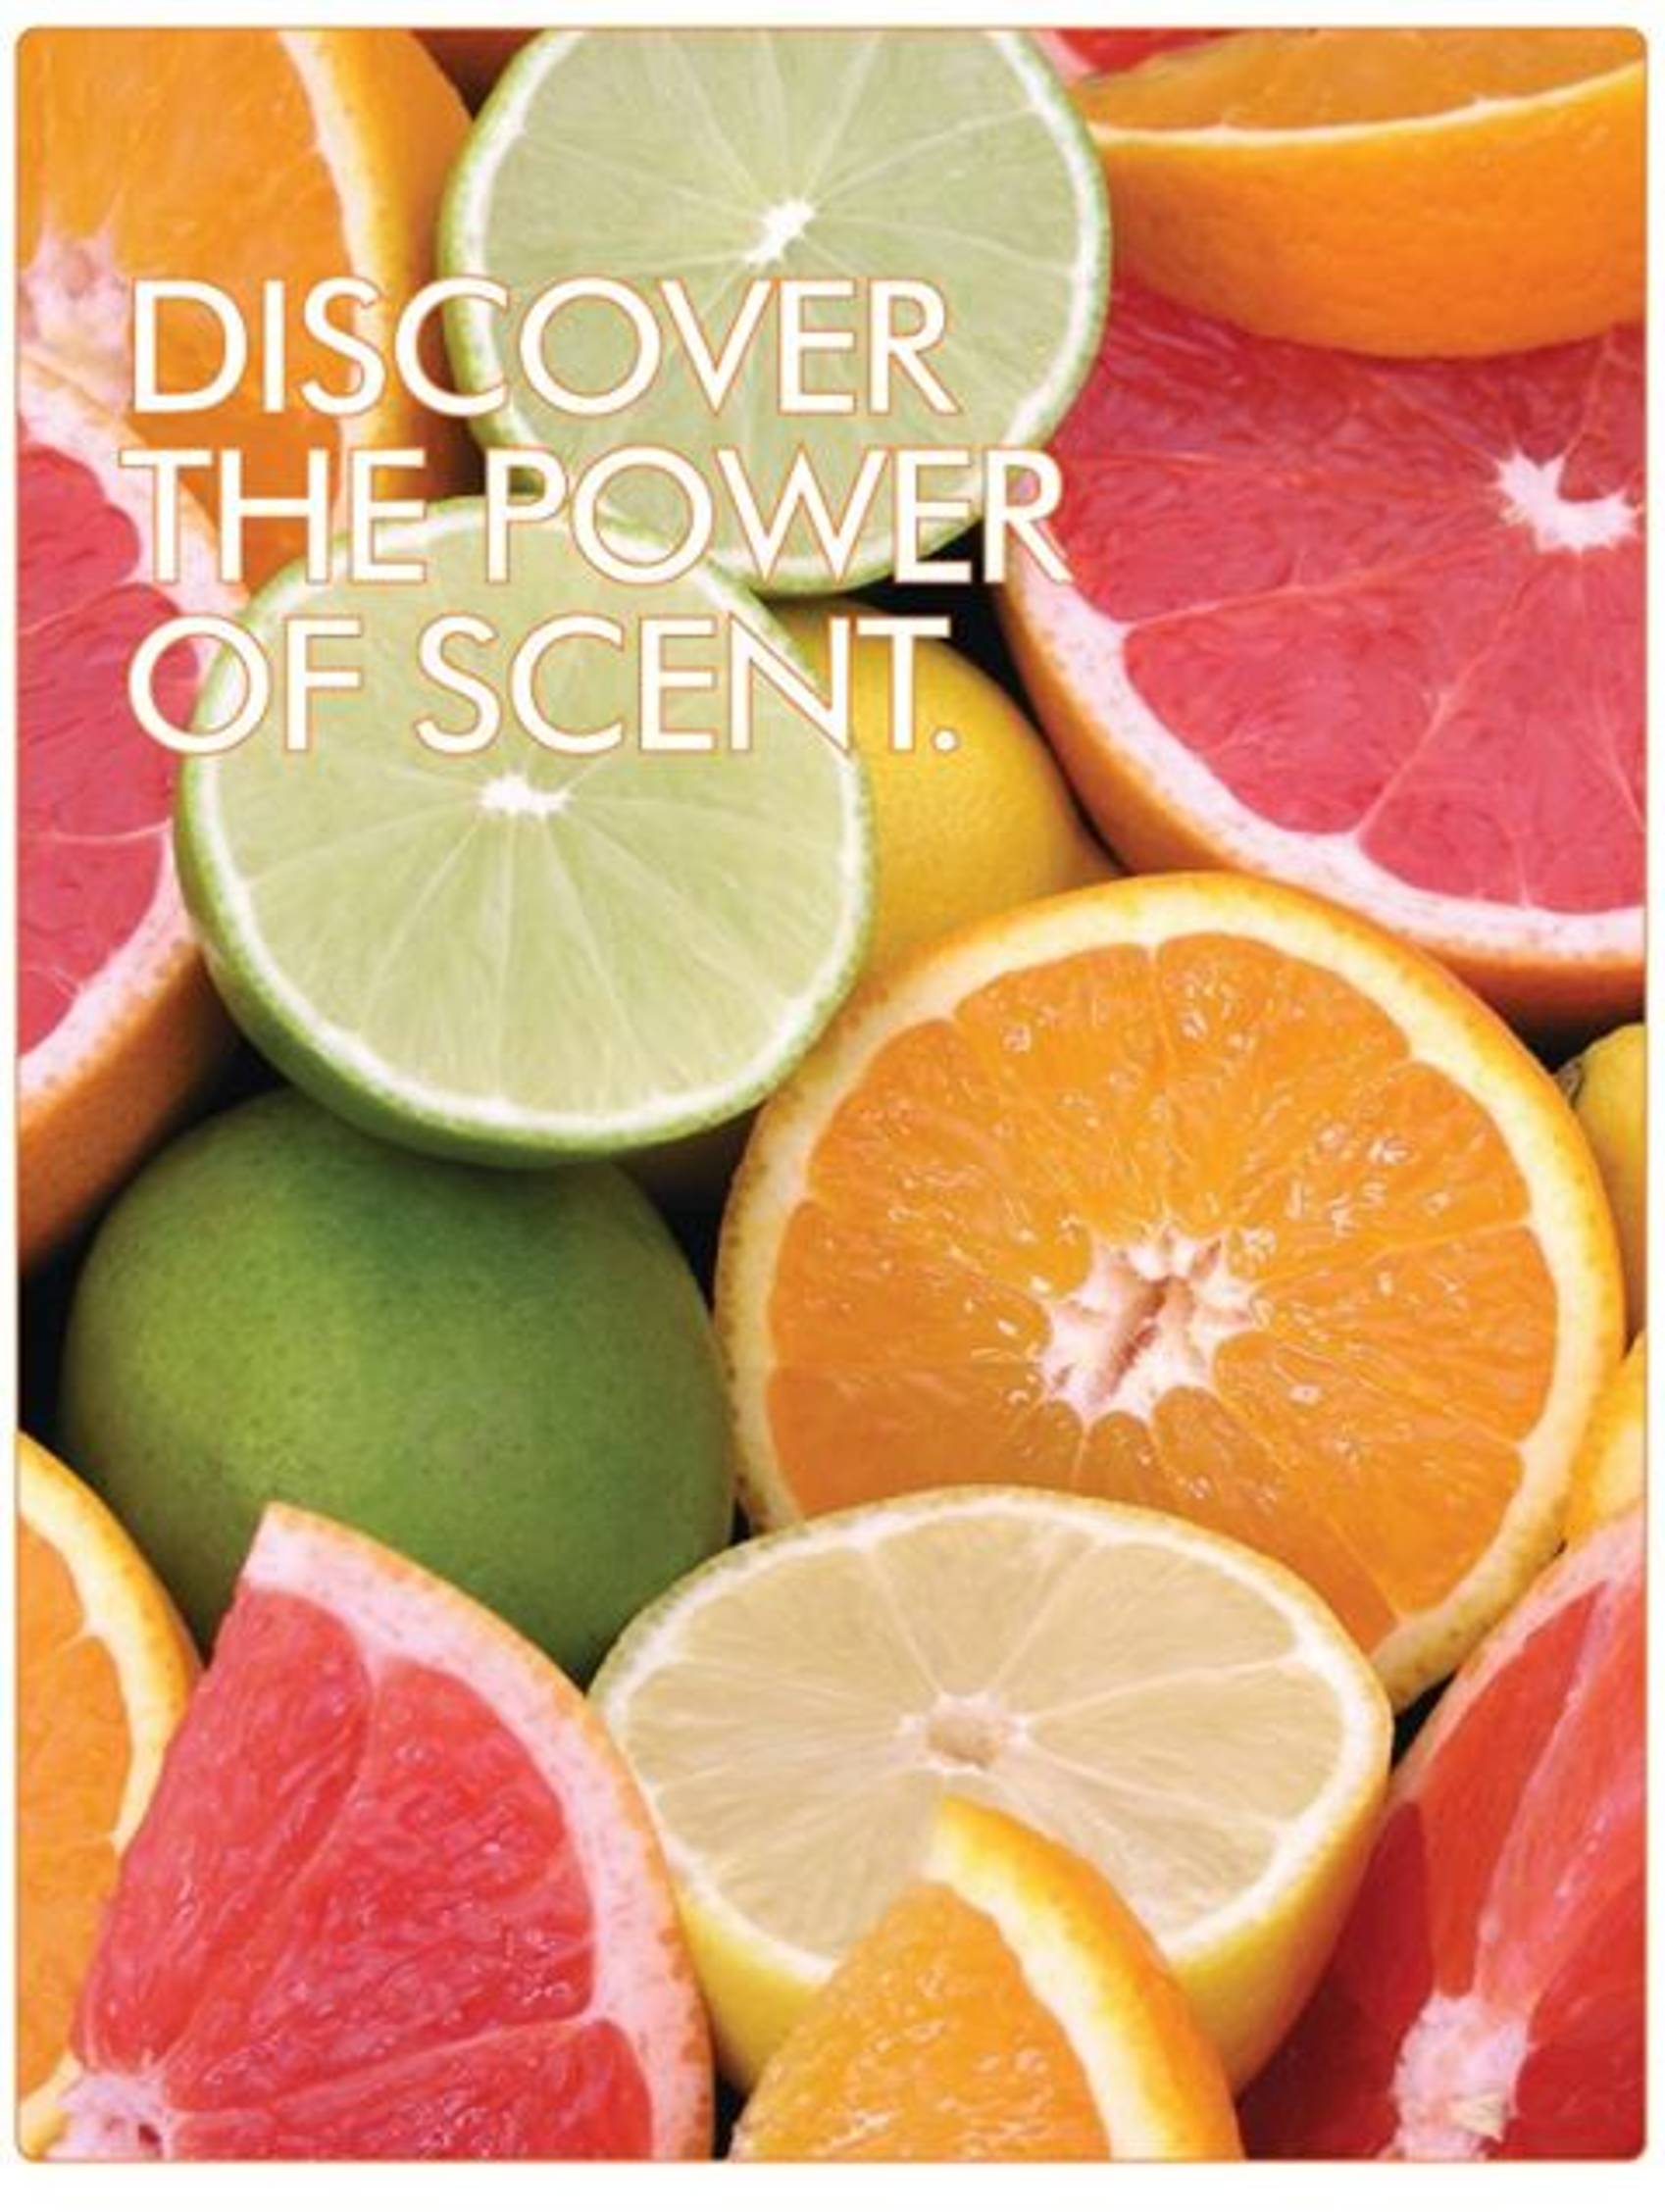 Discover the power of scent!